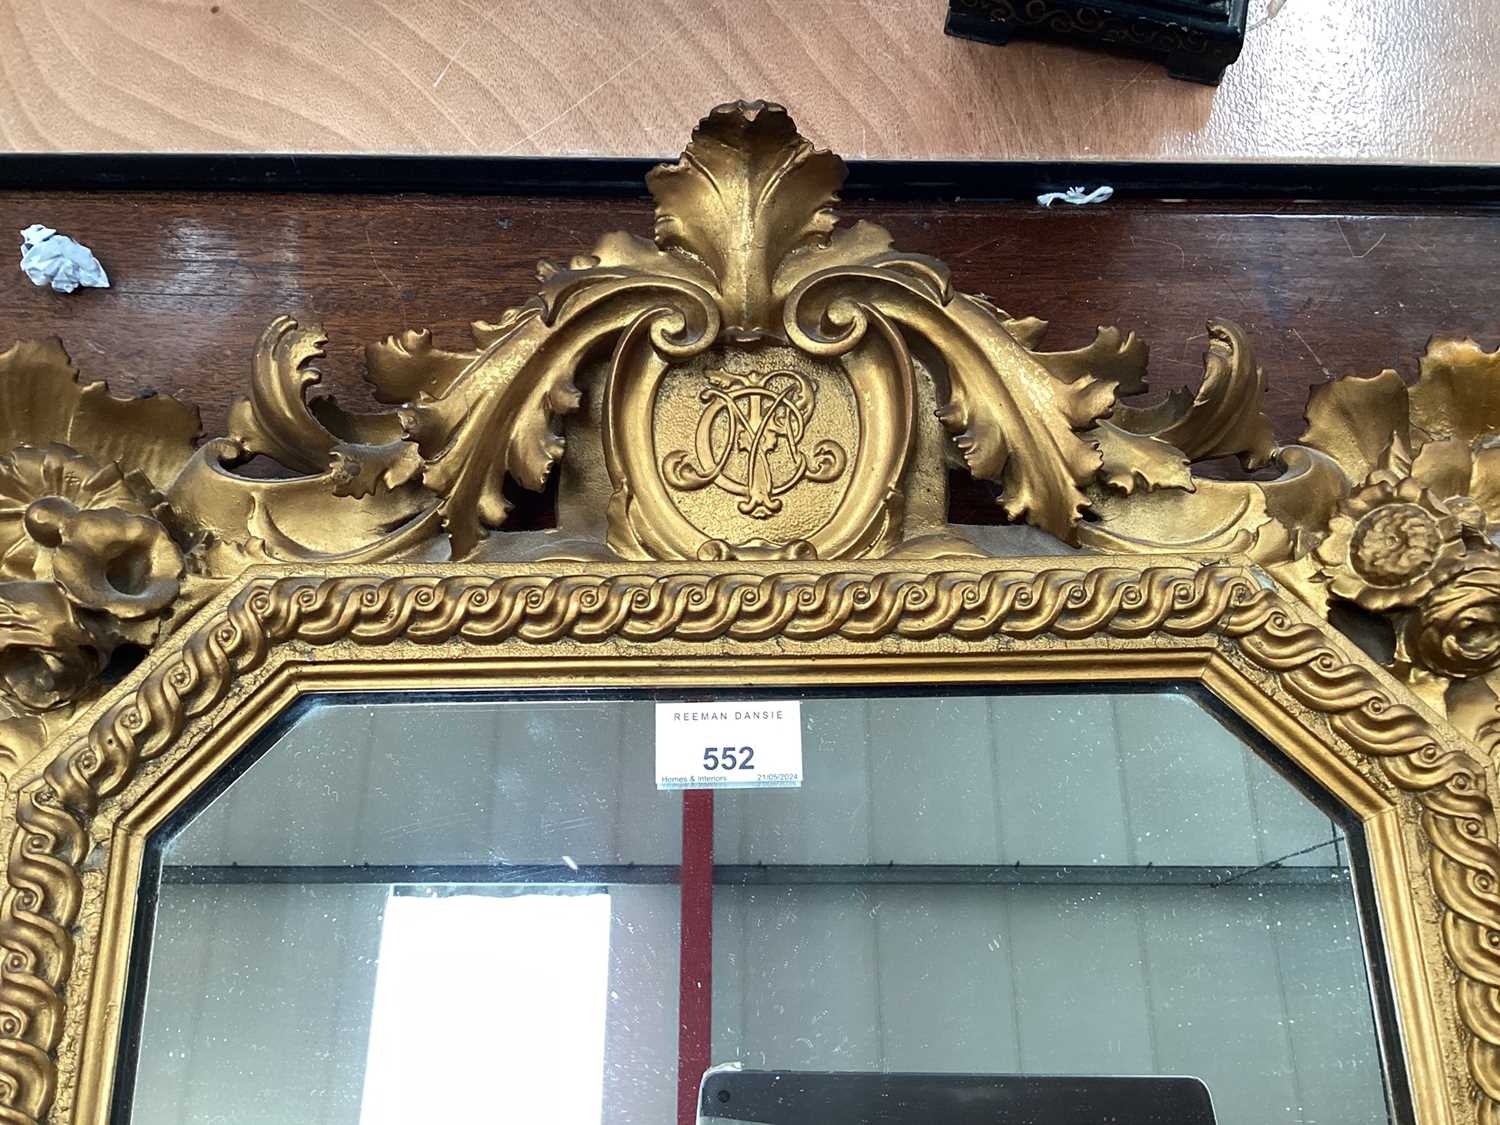 Antique carved giltwood decorative hanging mirror with central crest containing initials. - Image 2 of 4